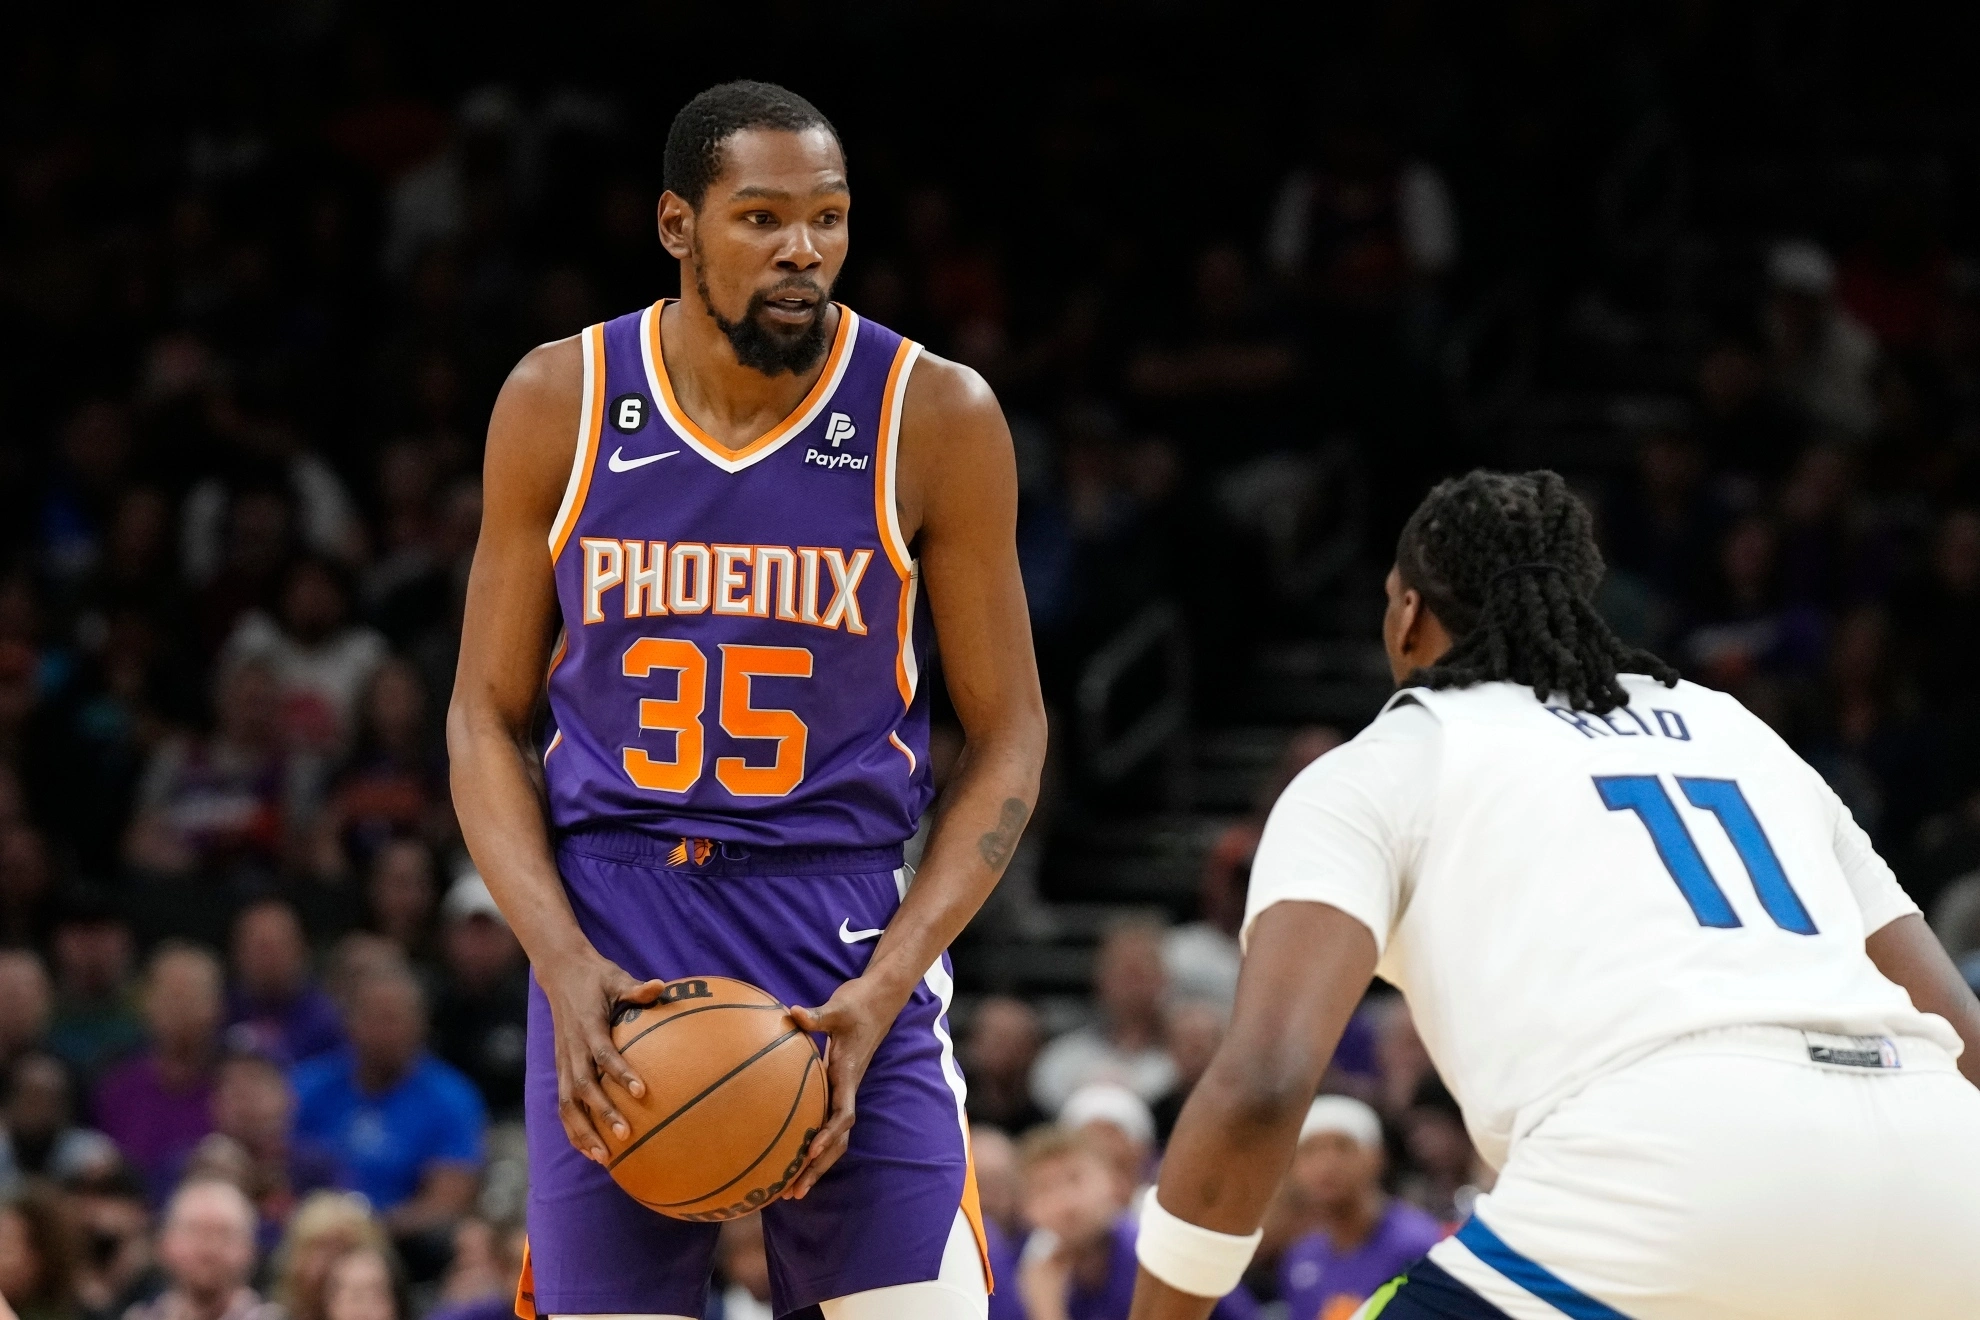 Kevin Durant's outstanding performance lift the Phoenix Suns past the Utah Jazz amid Rockets star recognition.